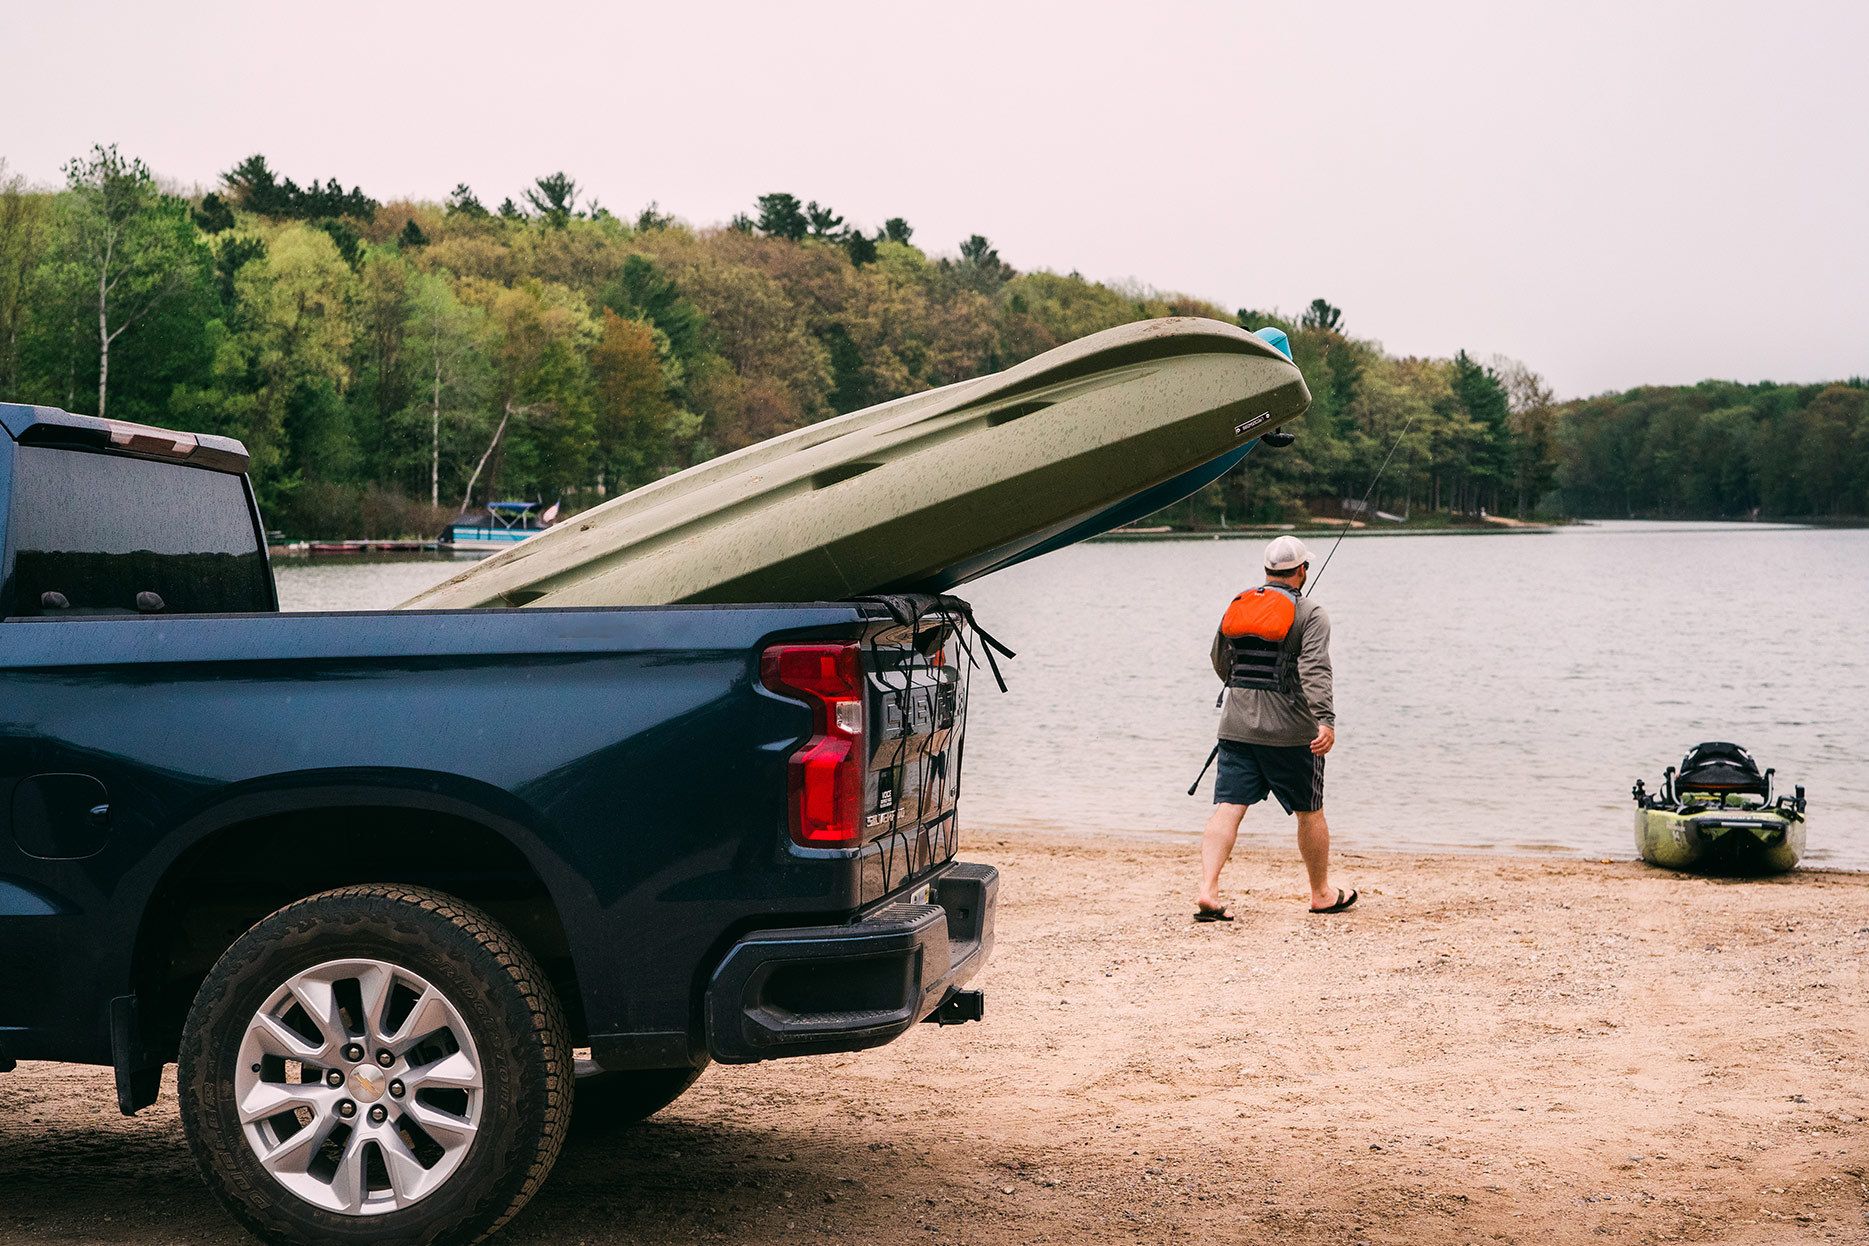 How to Secure a Kayak in a Truck Bed